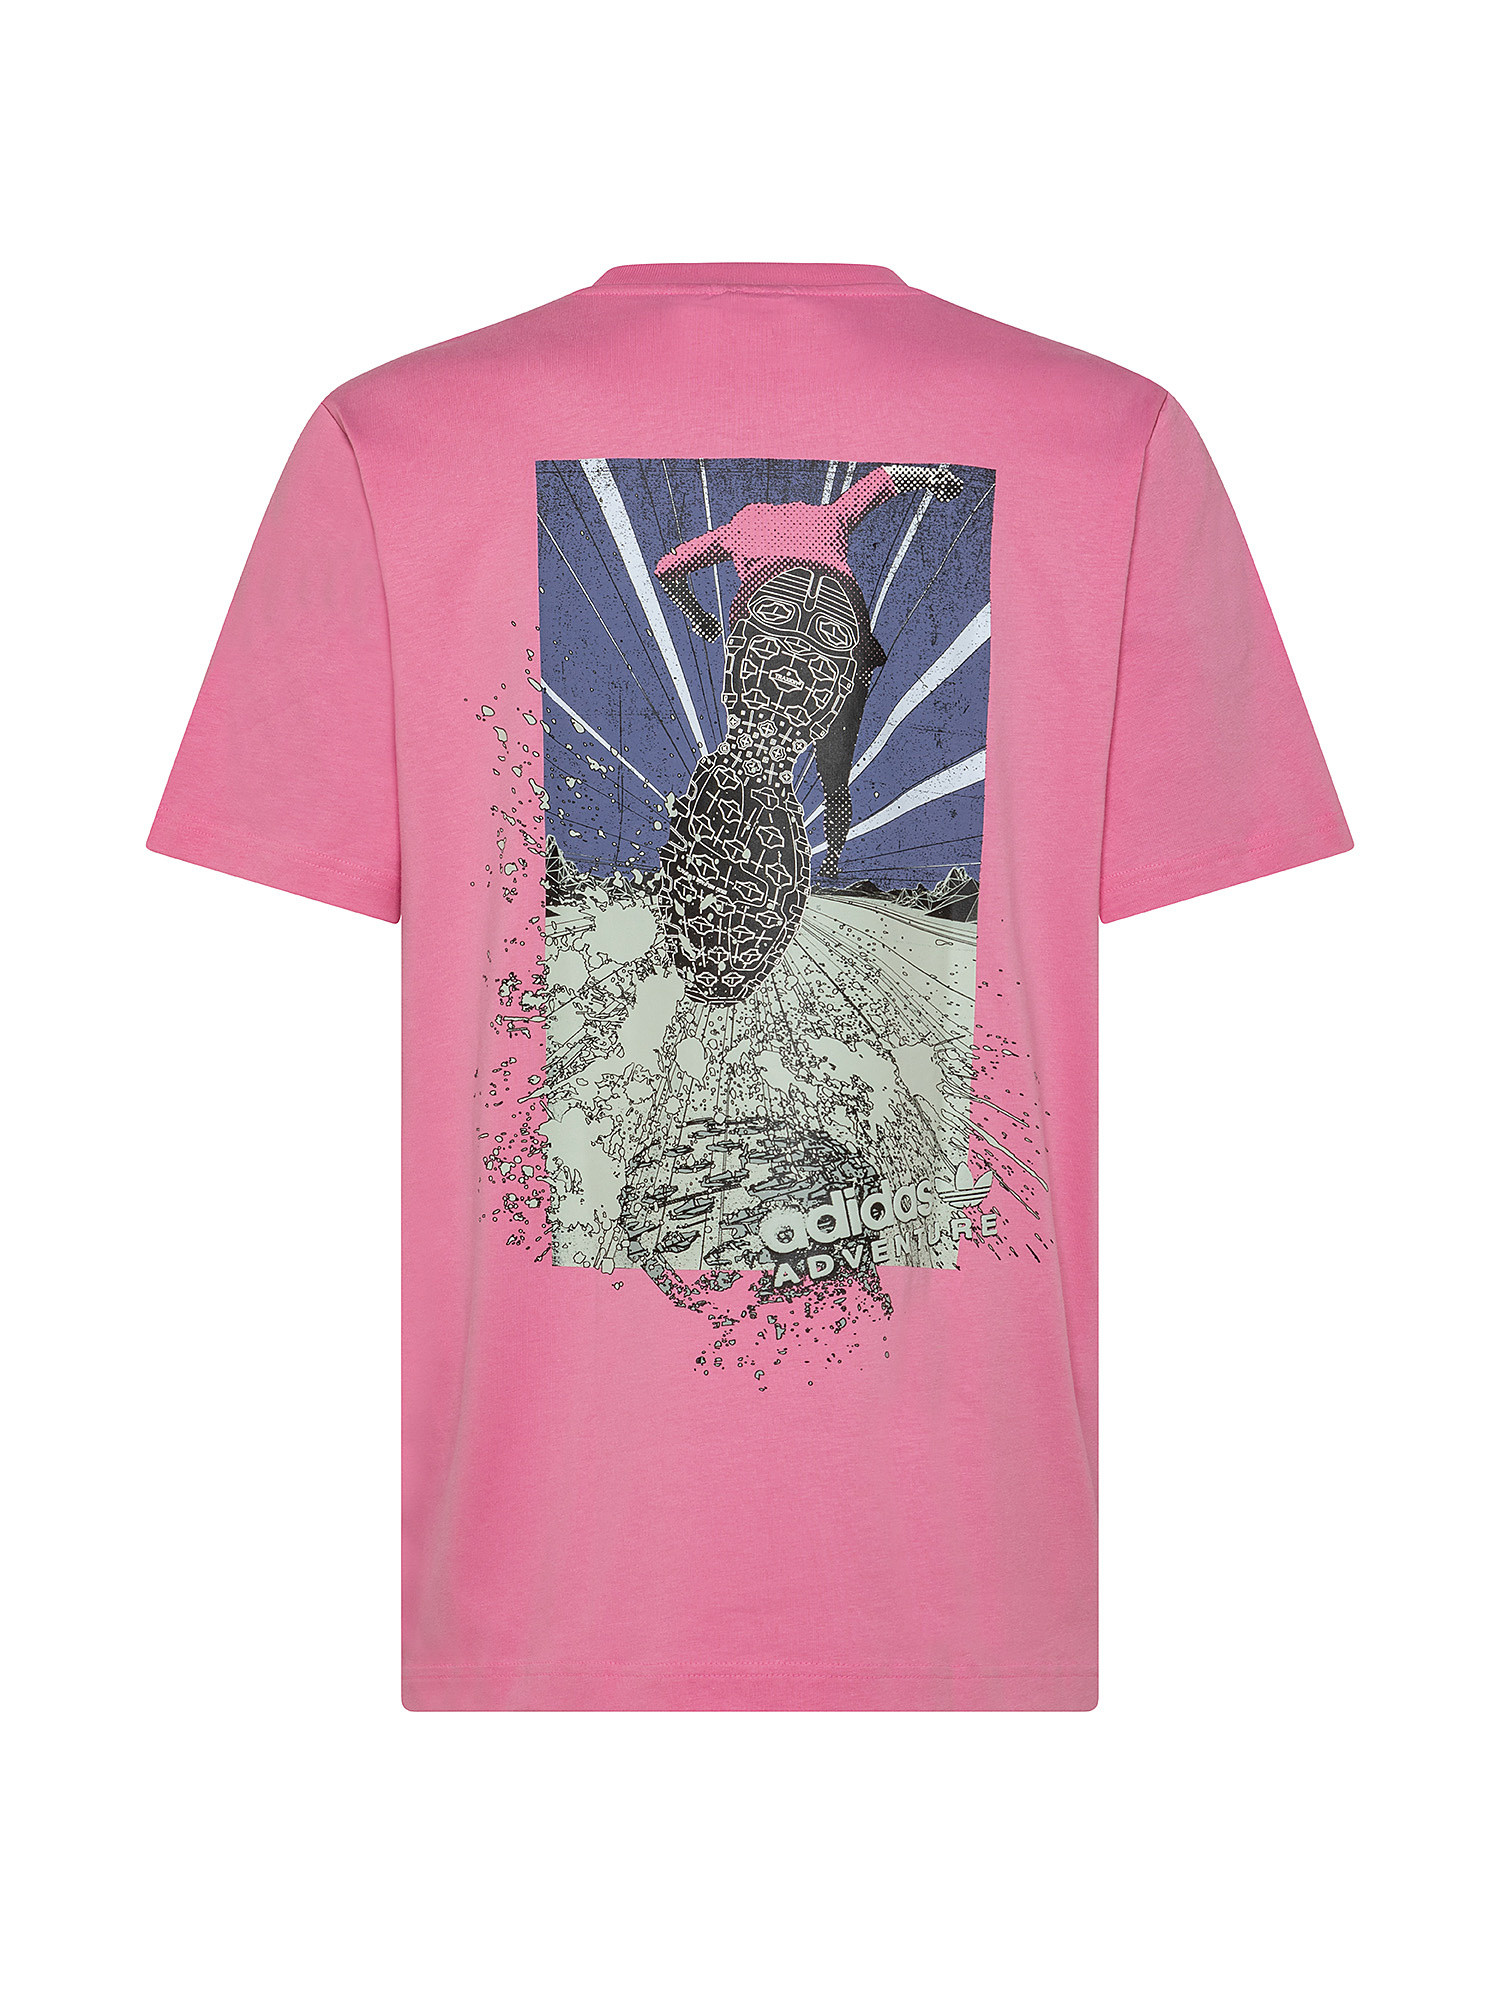 Adidas - Adventure trail T-shirt, Pink, large image number 1